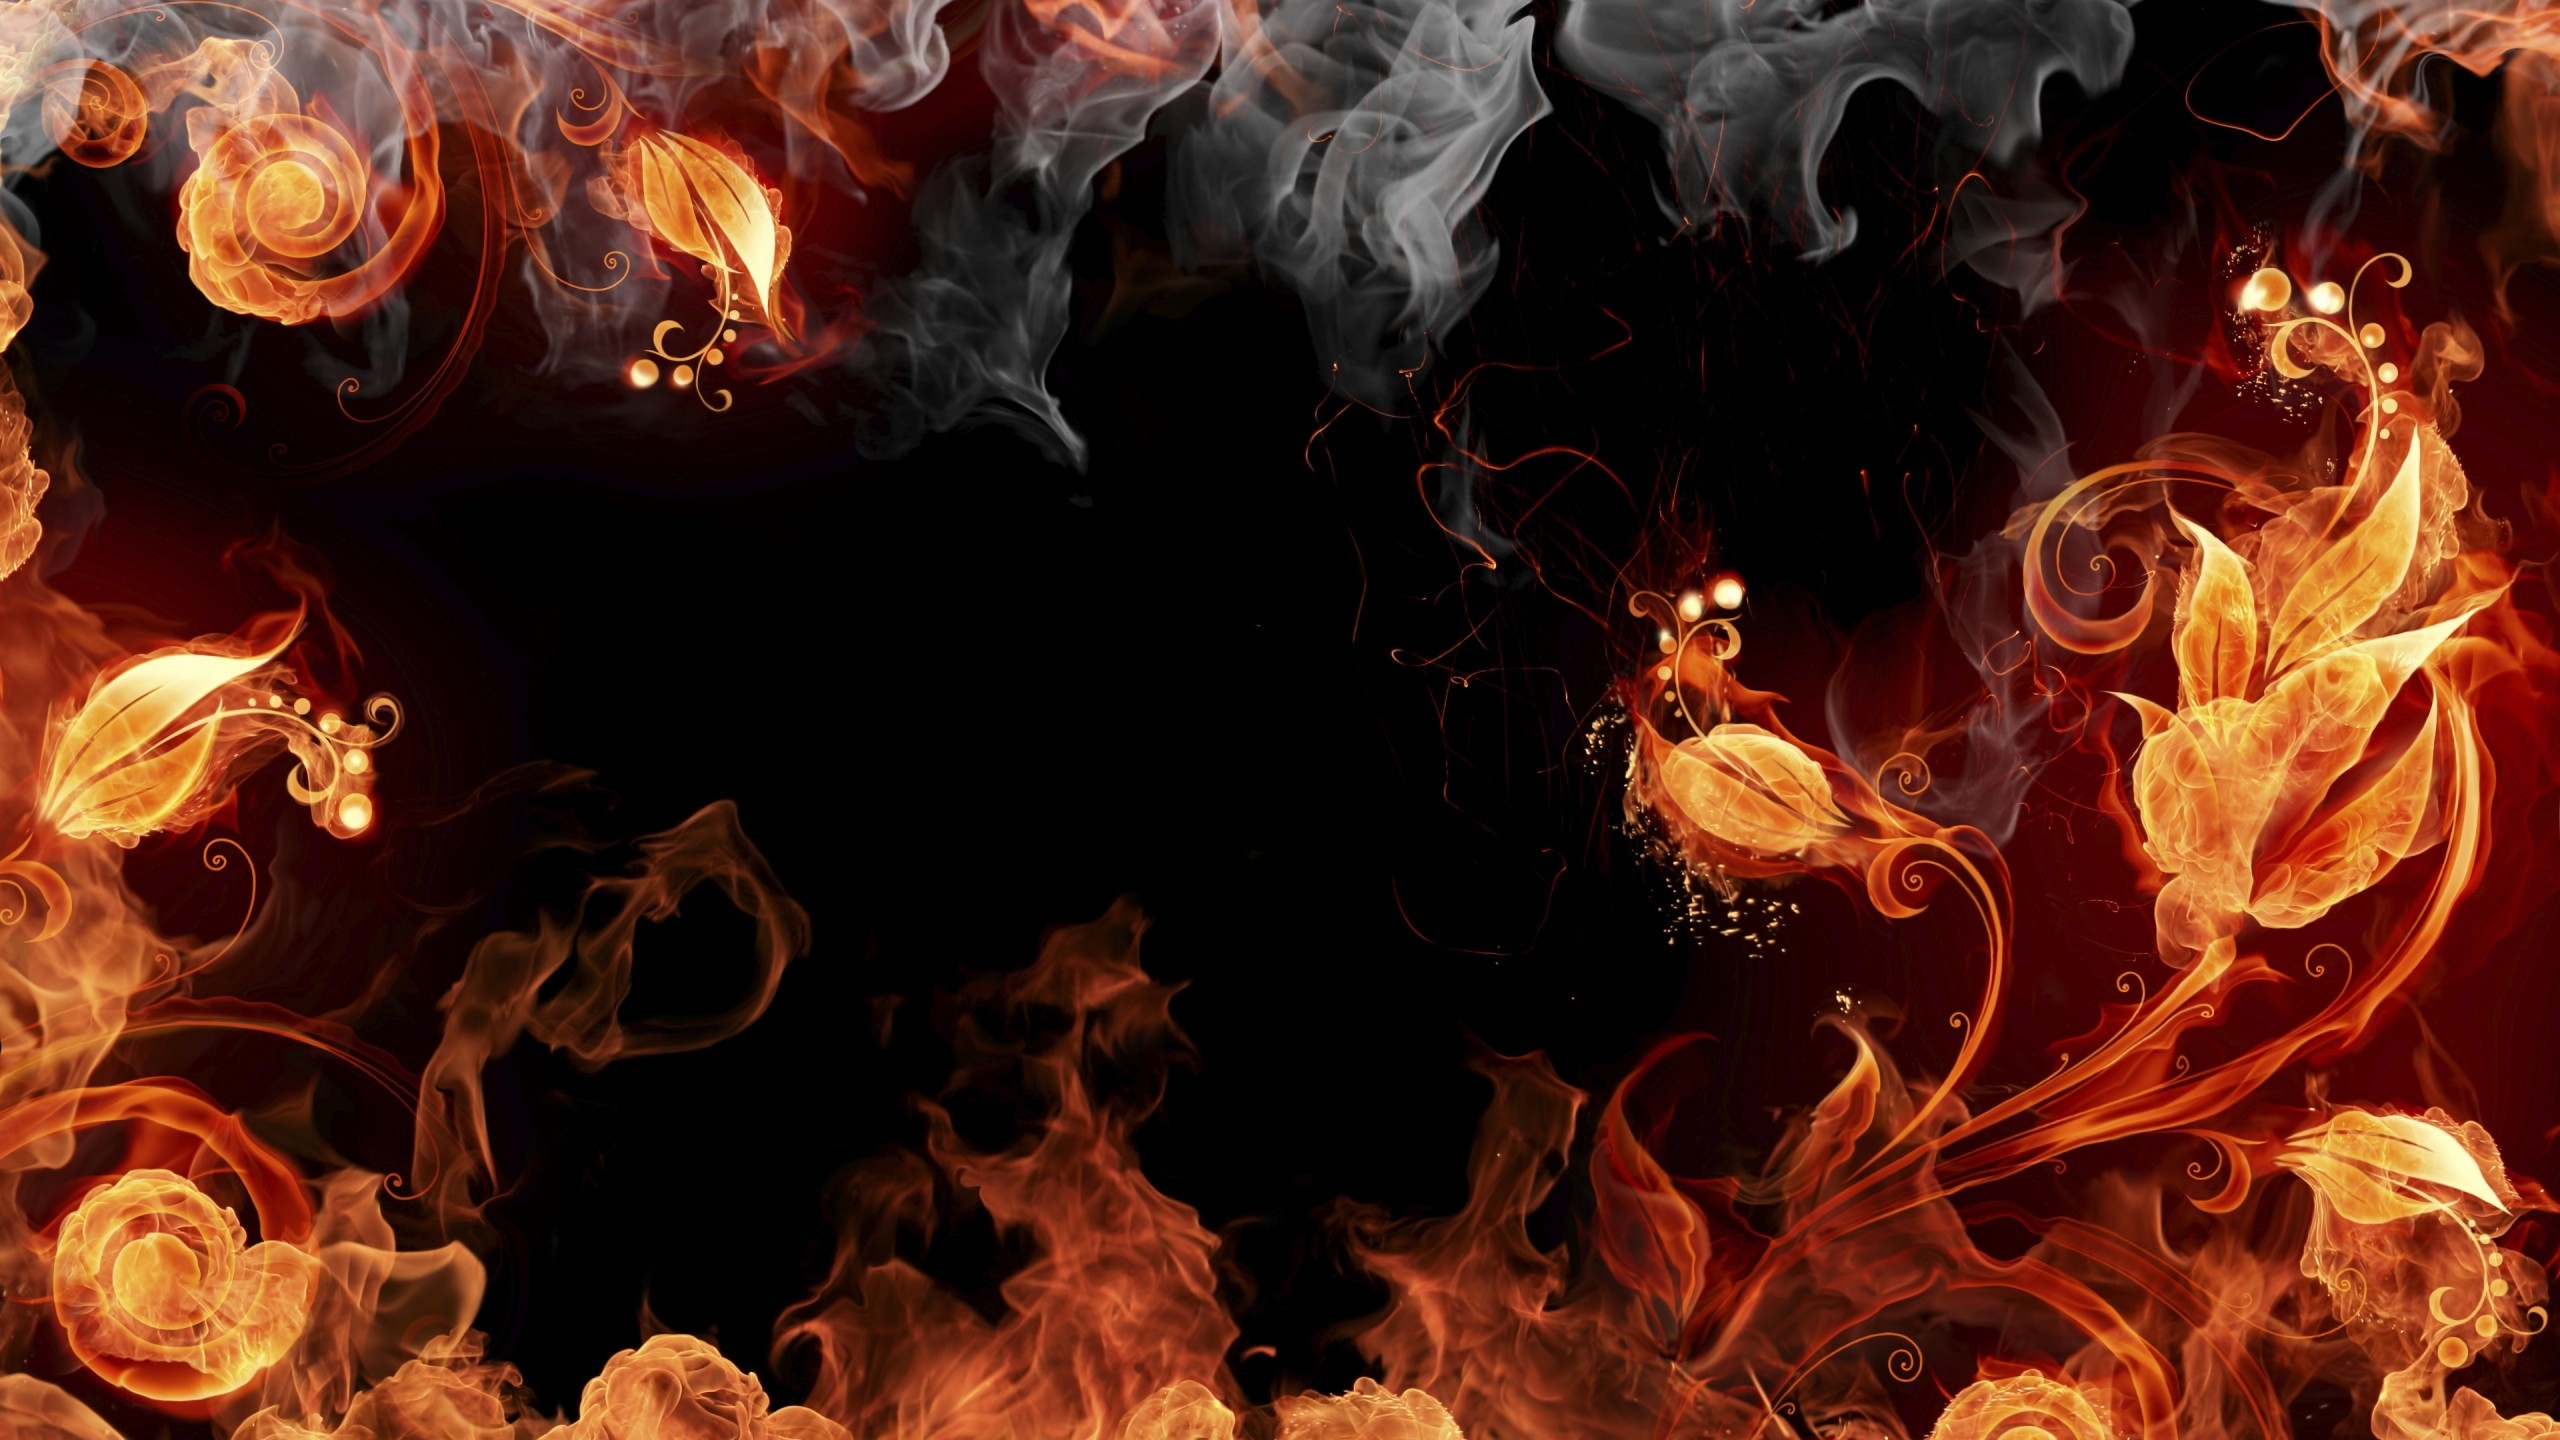 Fire Abstract Art for 2560x1440 HDTV resolution